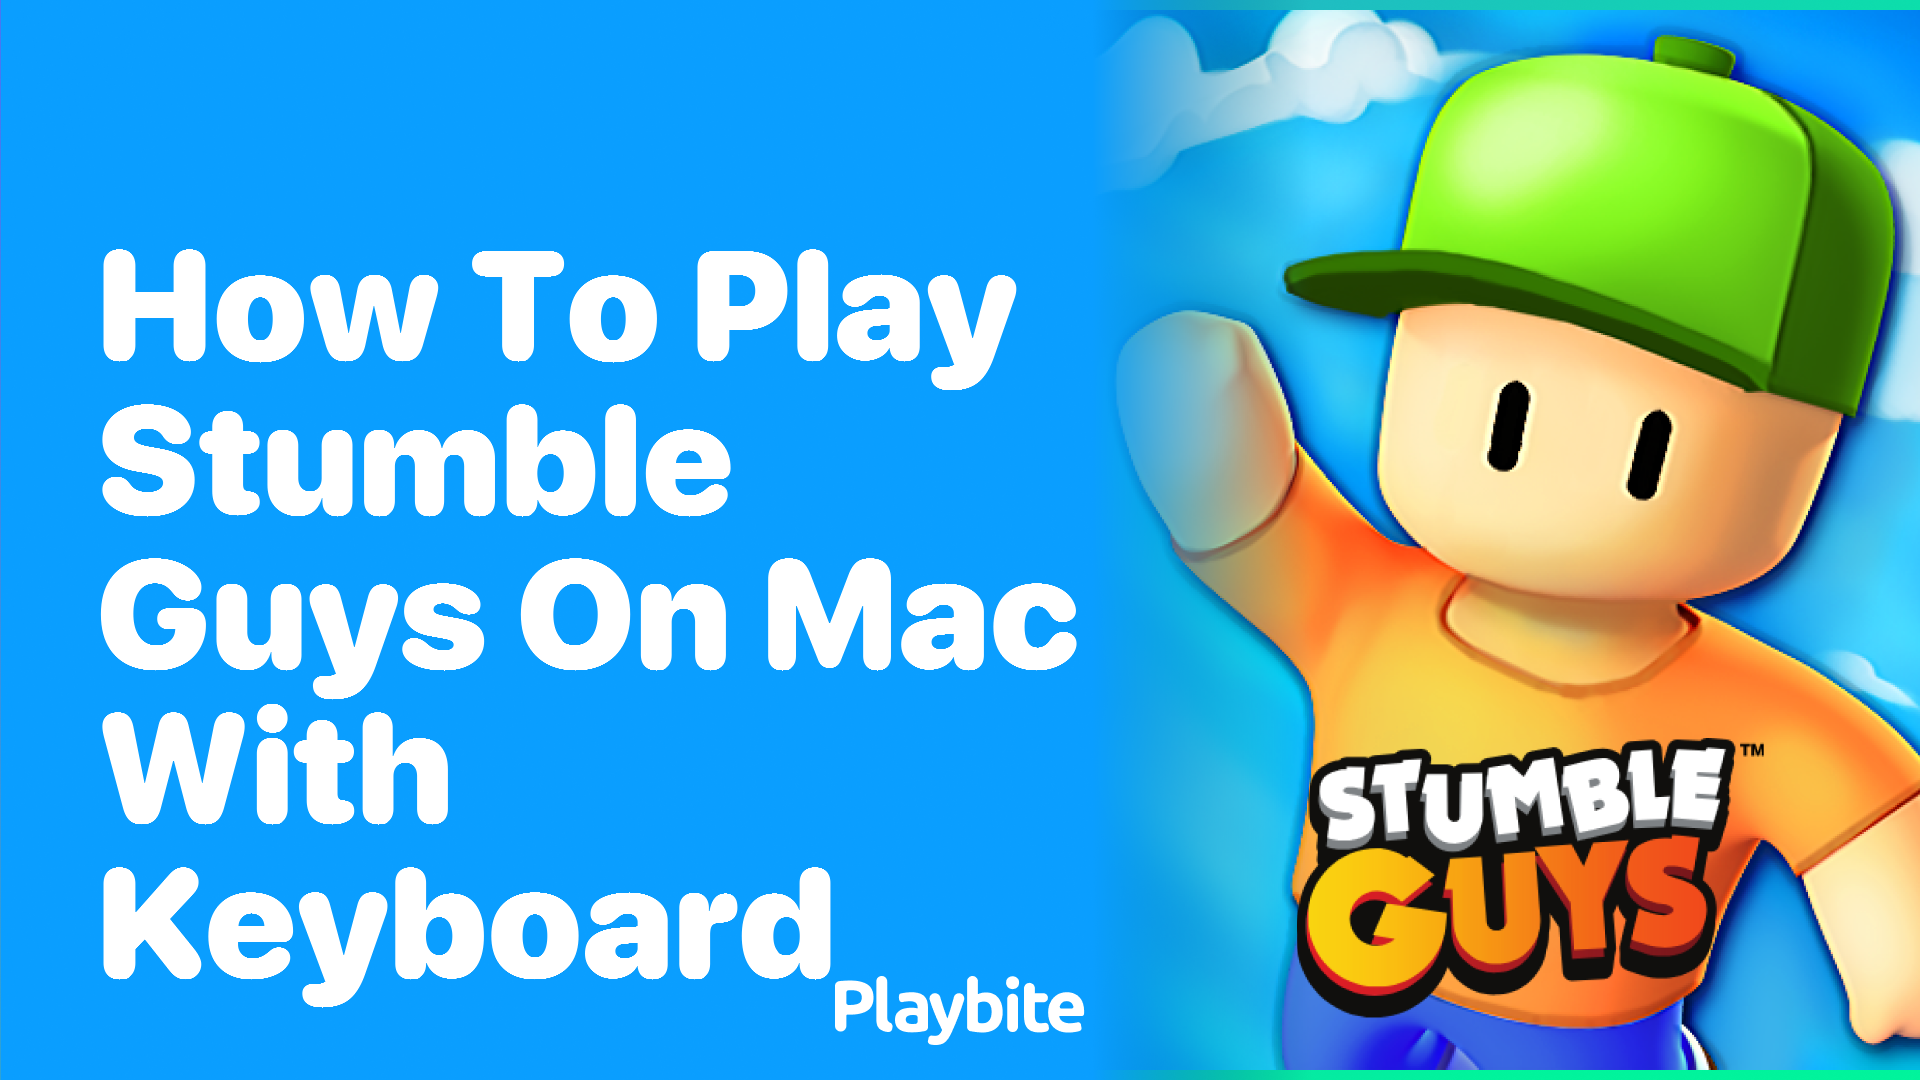 How to Play Stumble Guys on Mac with Keyboard